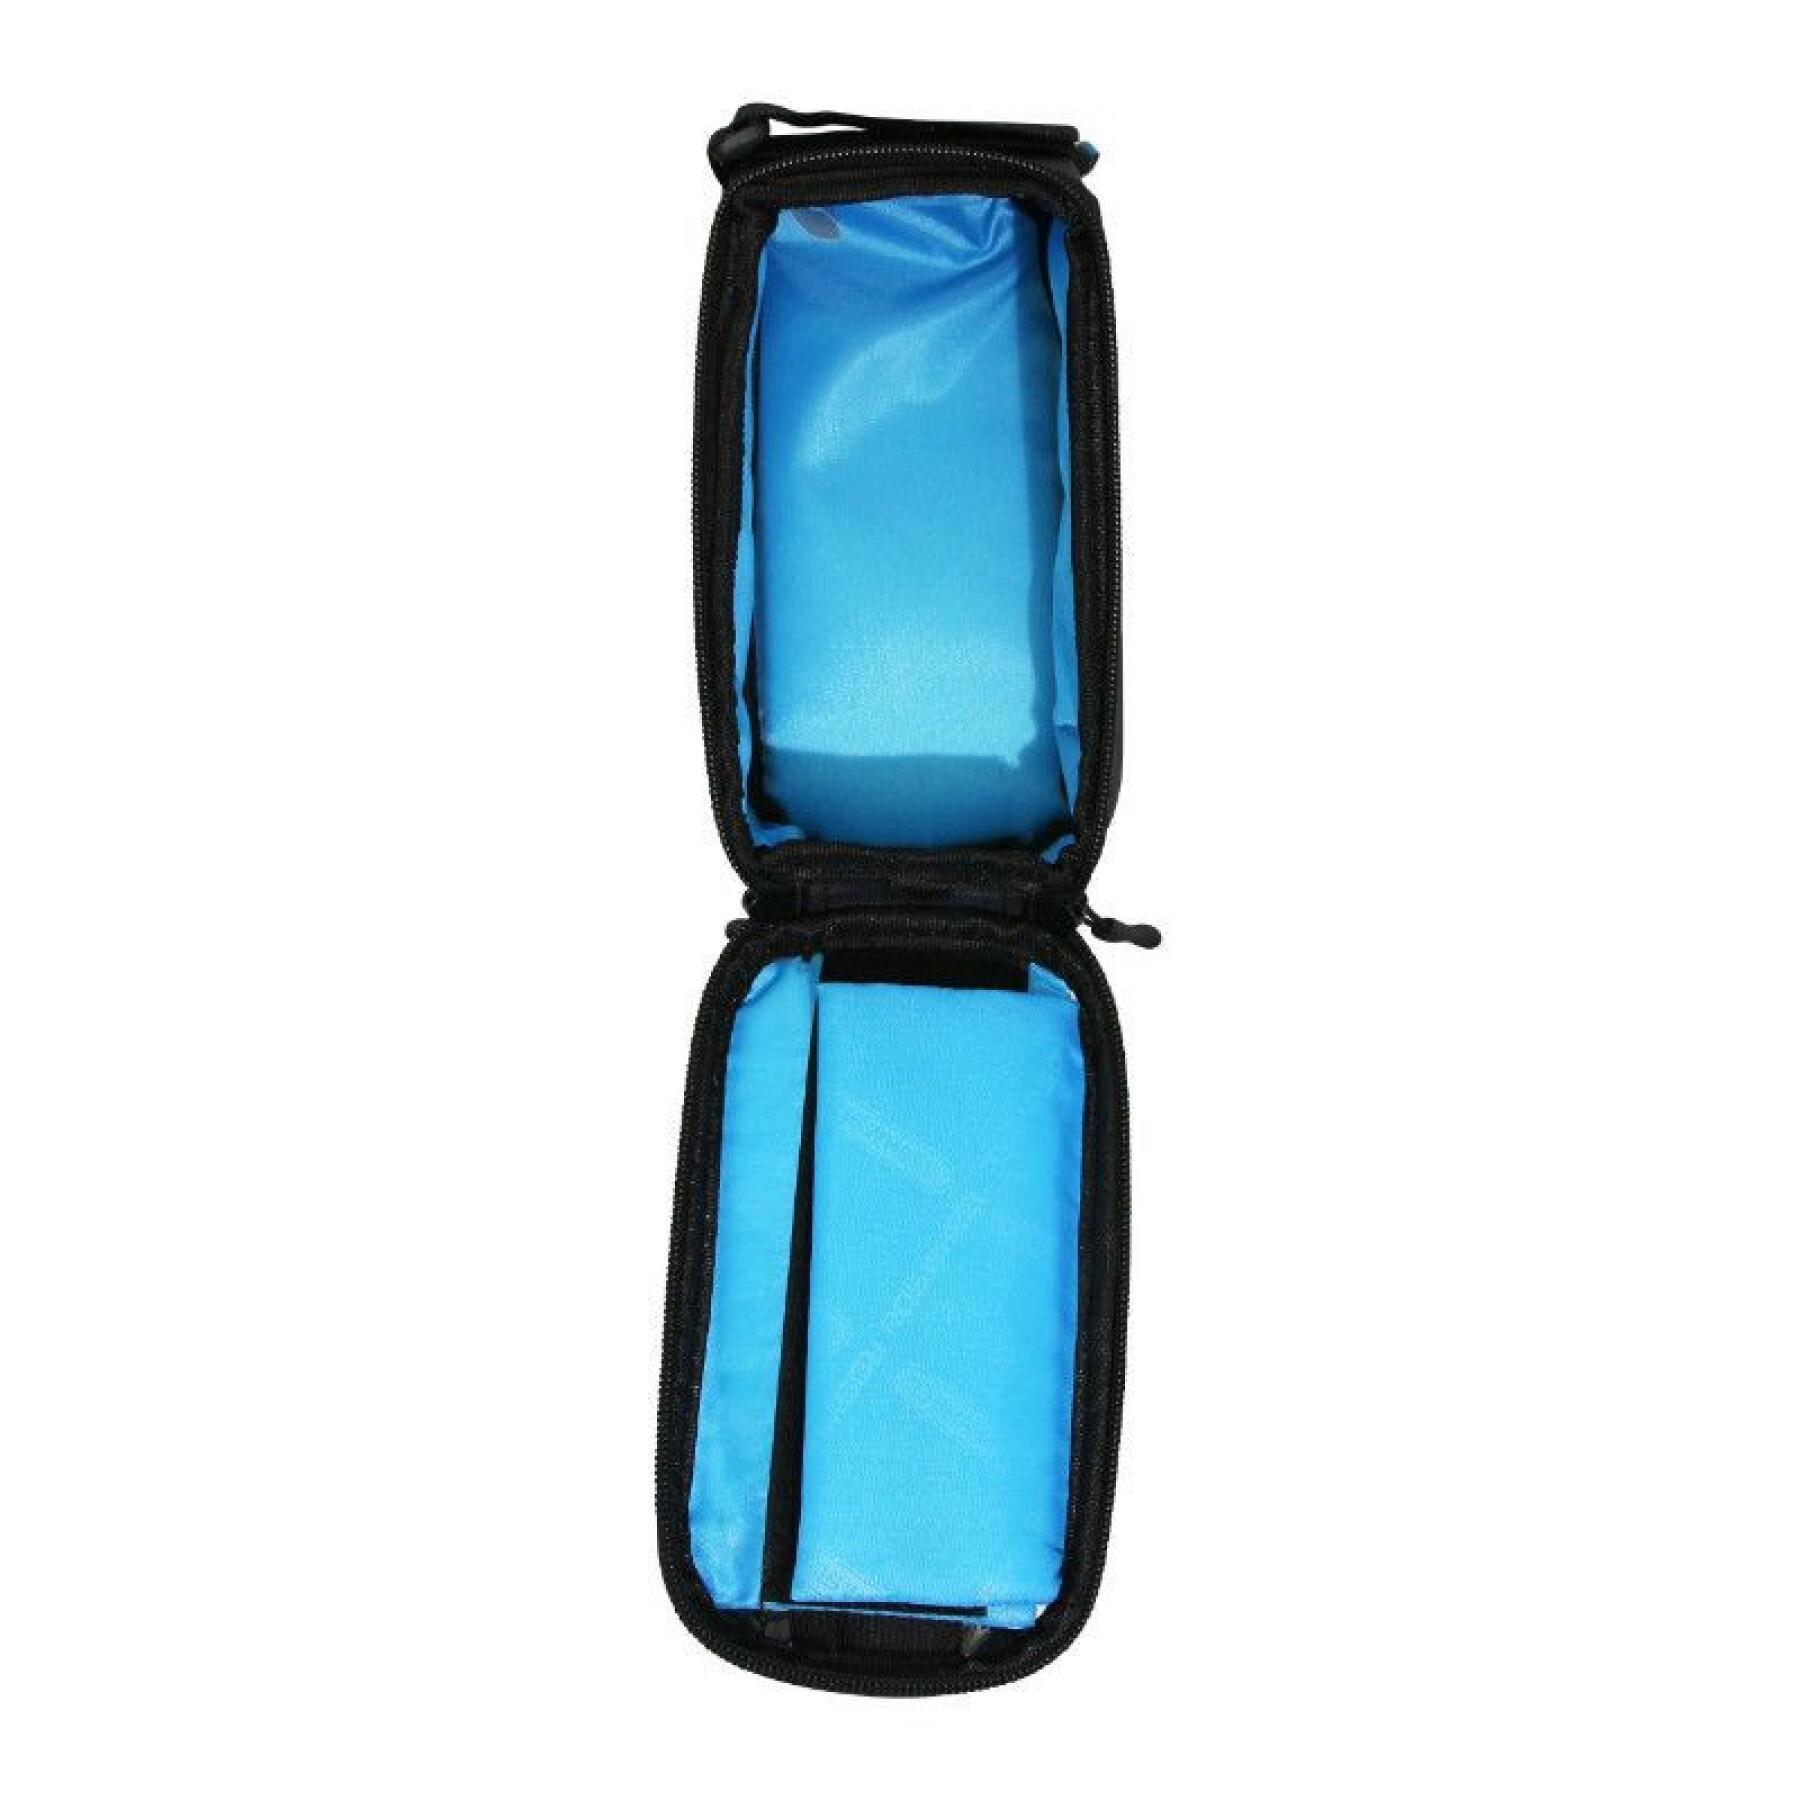 Bike frame bag-potential smartphone for cell phone - i-phone velcro attachment P2R 19.5 x 10 x 9 cm